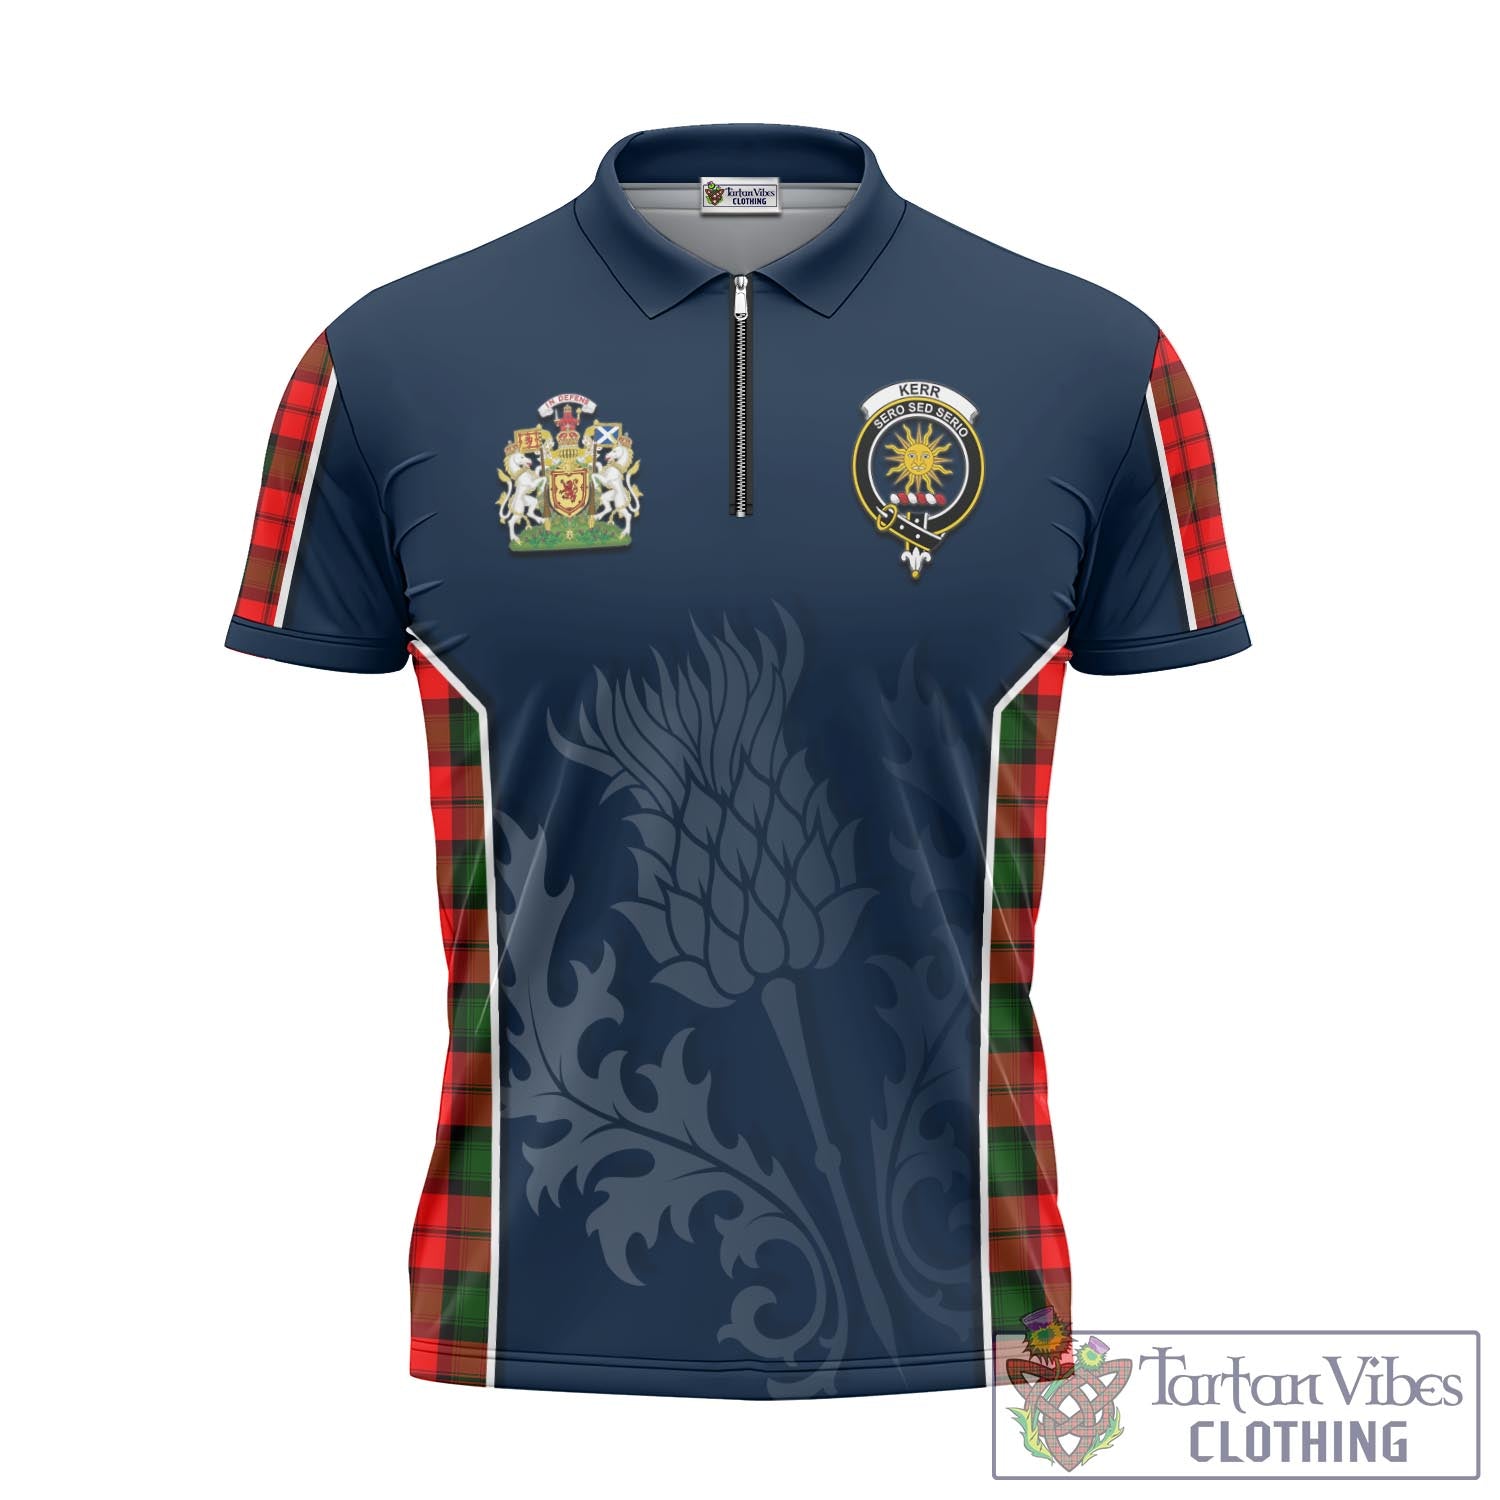 Tartan Vibes Clothing Kerr Modern Tartan Zipper Polo Shirt with Family Crest and Scottish Thistle Vibes Sport Style